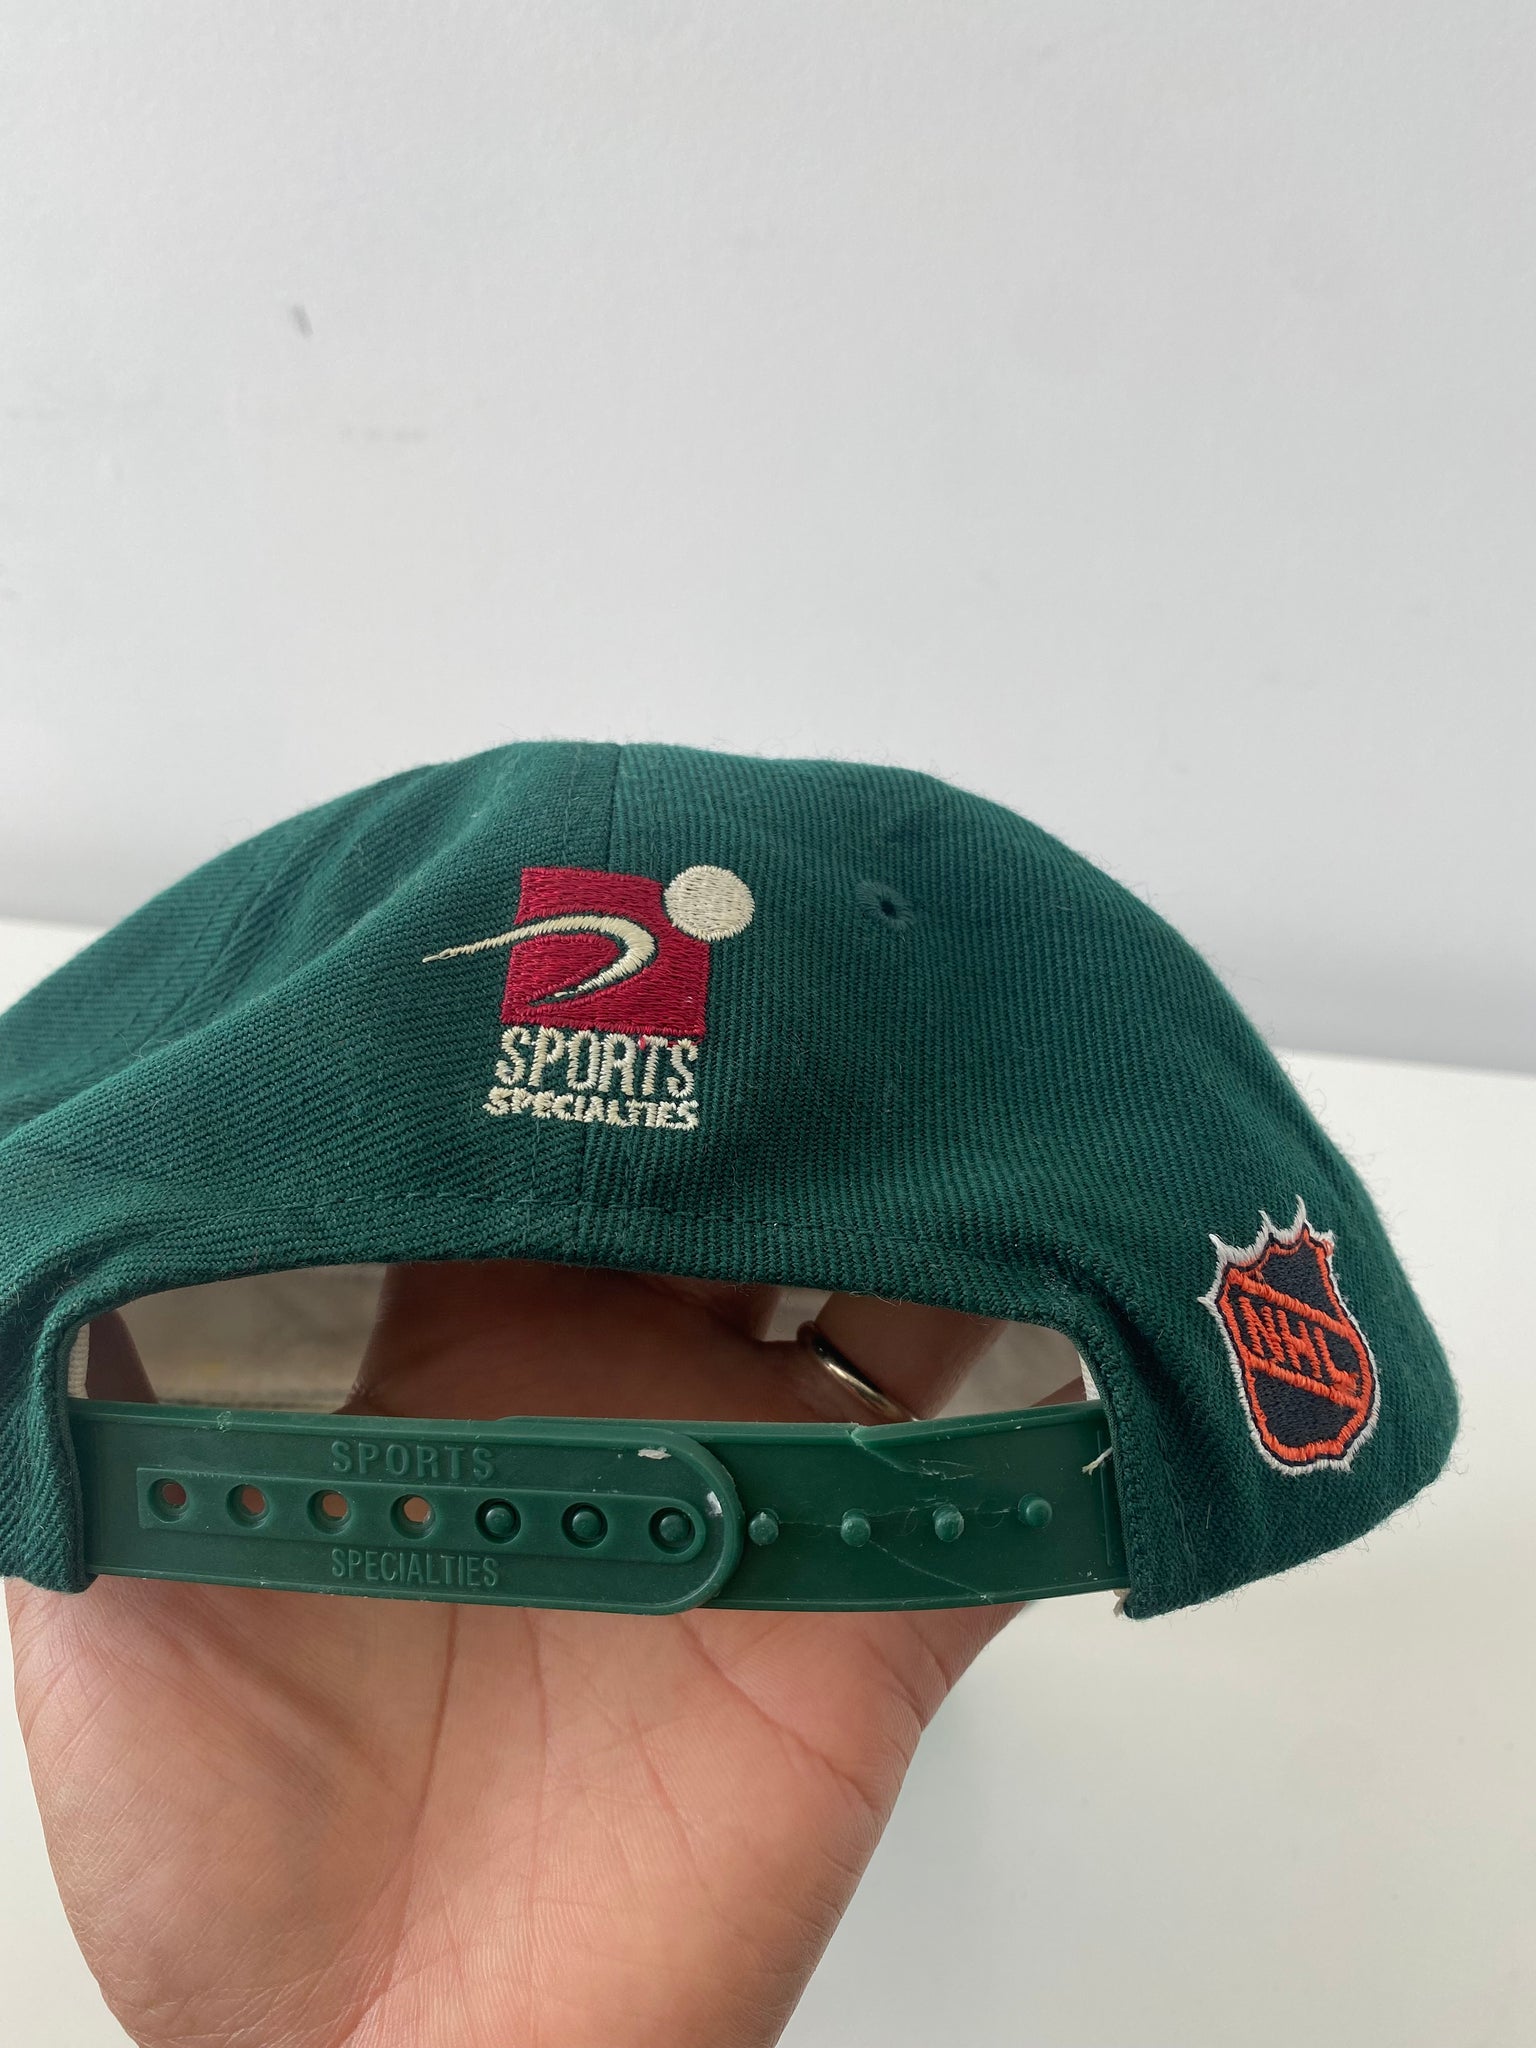 Vintage Phoenix Coyotes Snapback by SS